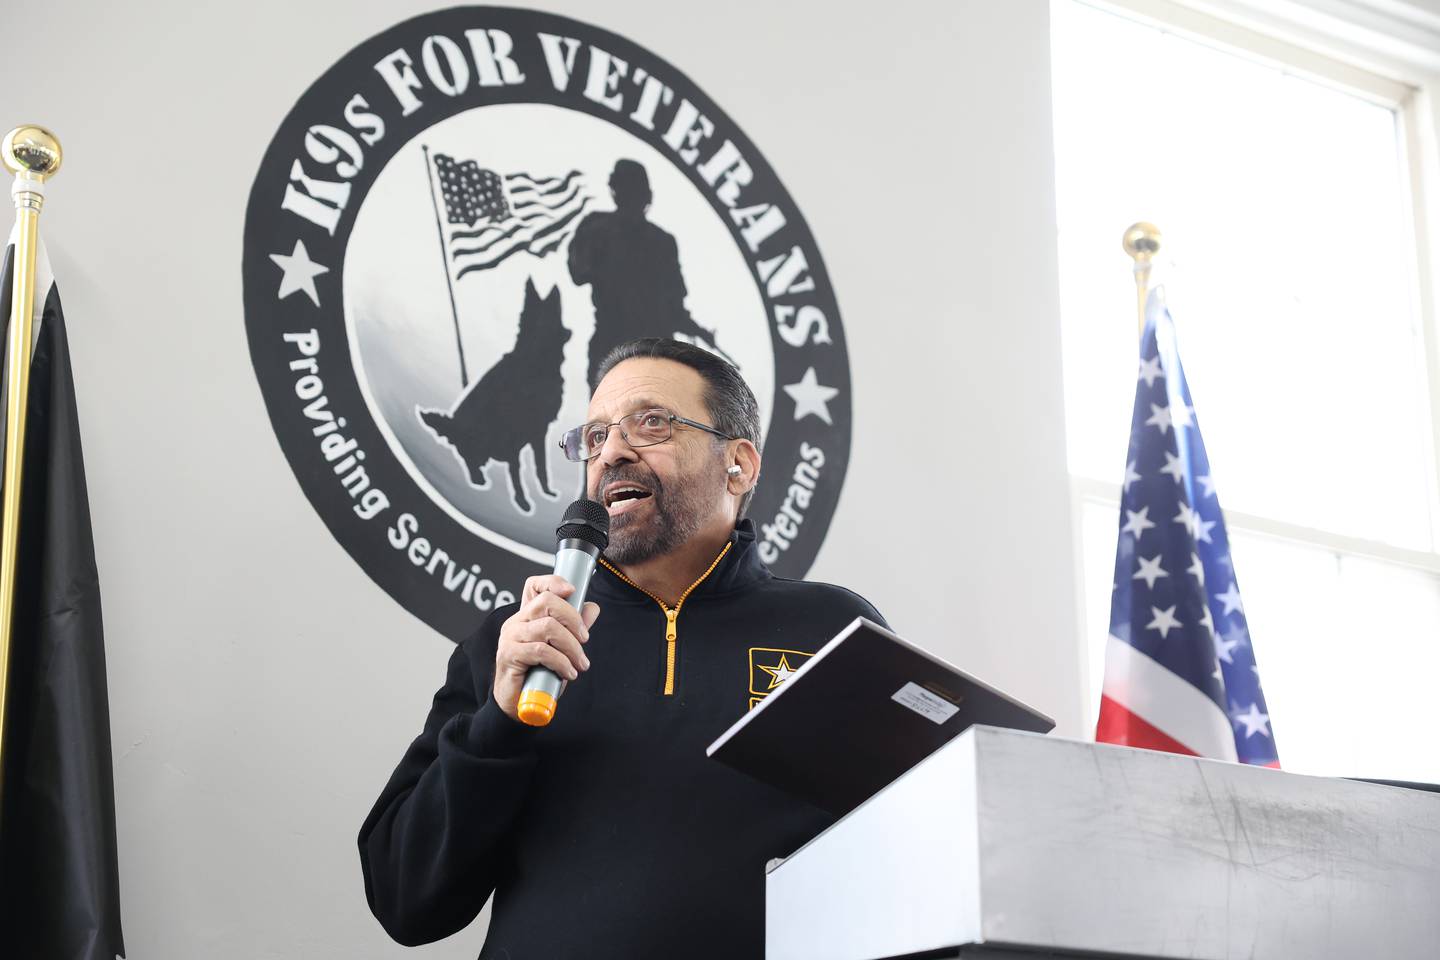 K9s for Veterans CEO and founder Michael Tellerino speaks at his organization's ribbon-cutting ceremony for the opening of its new training campus on Wednesday, Feb. 15, 2023, in Joliet.